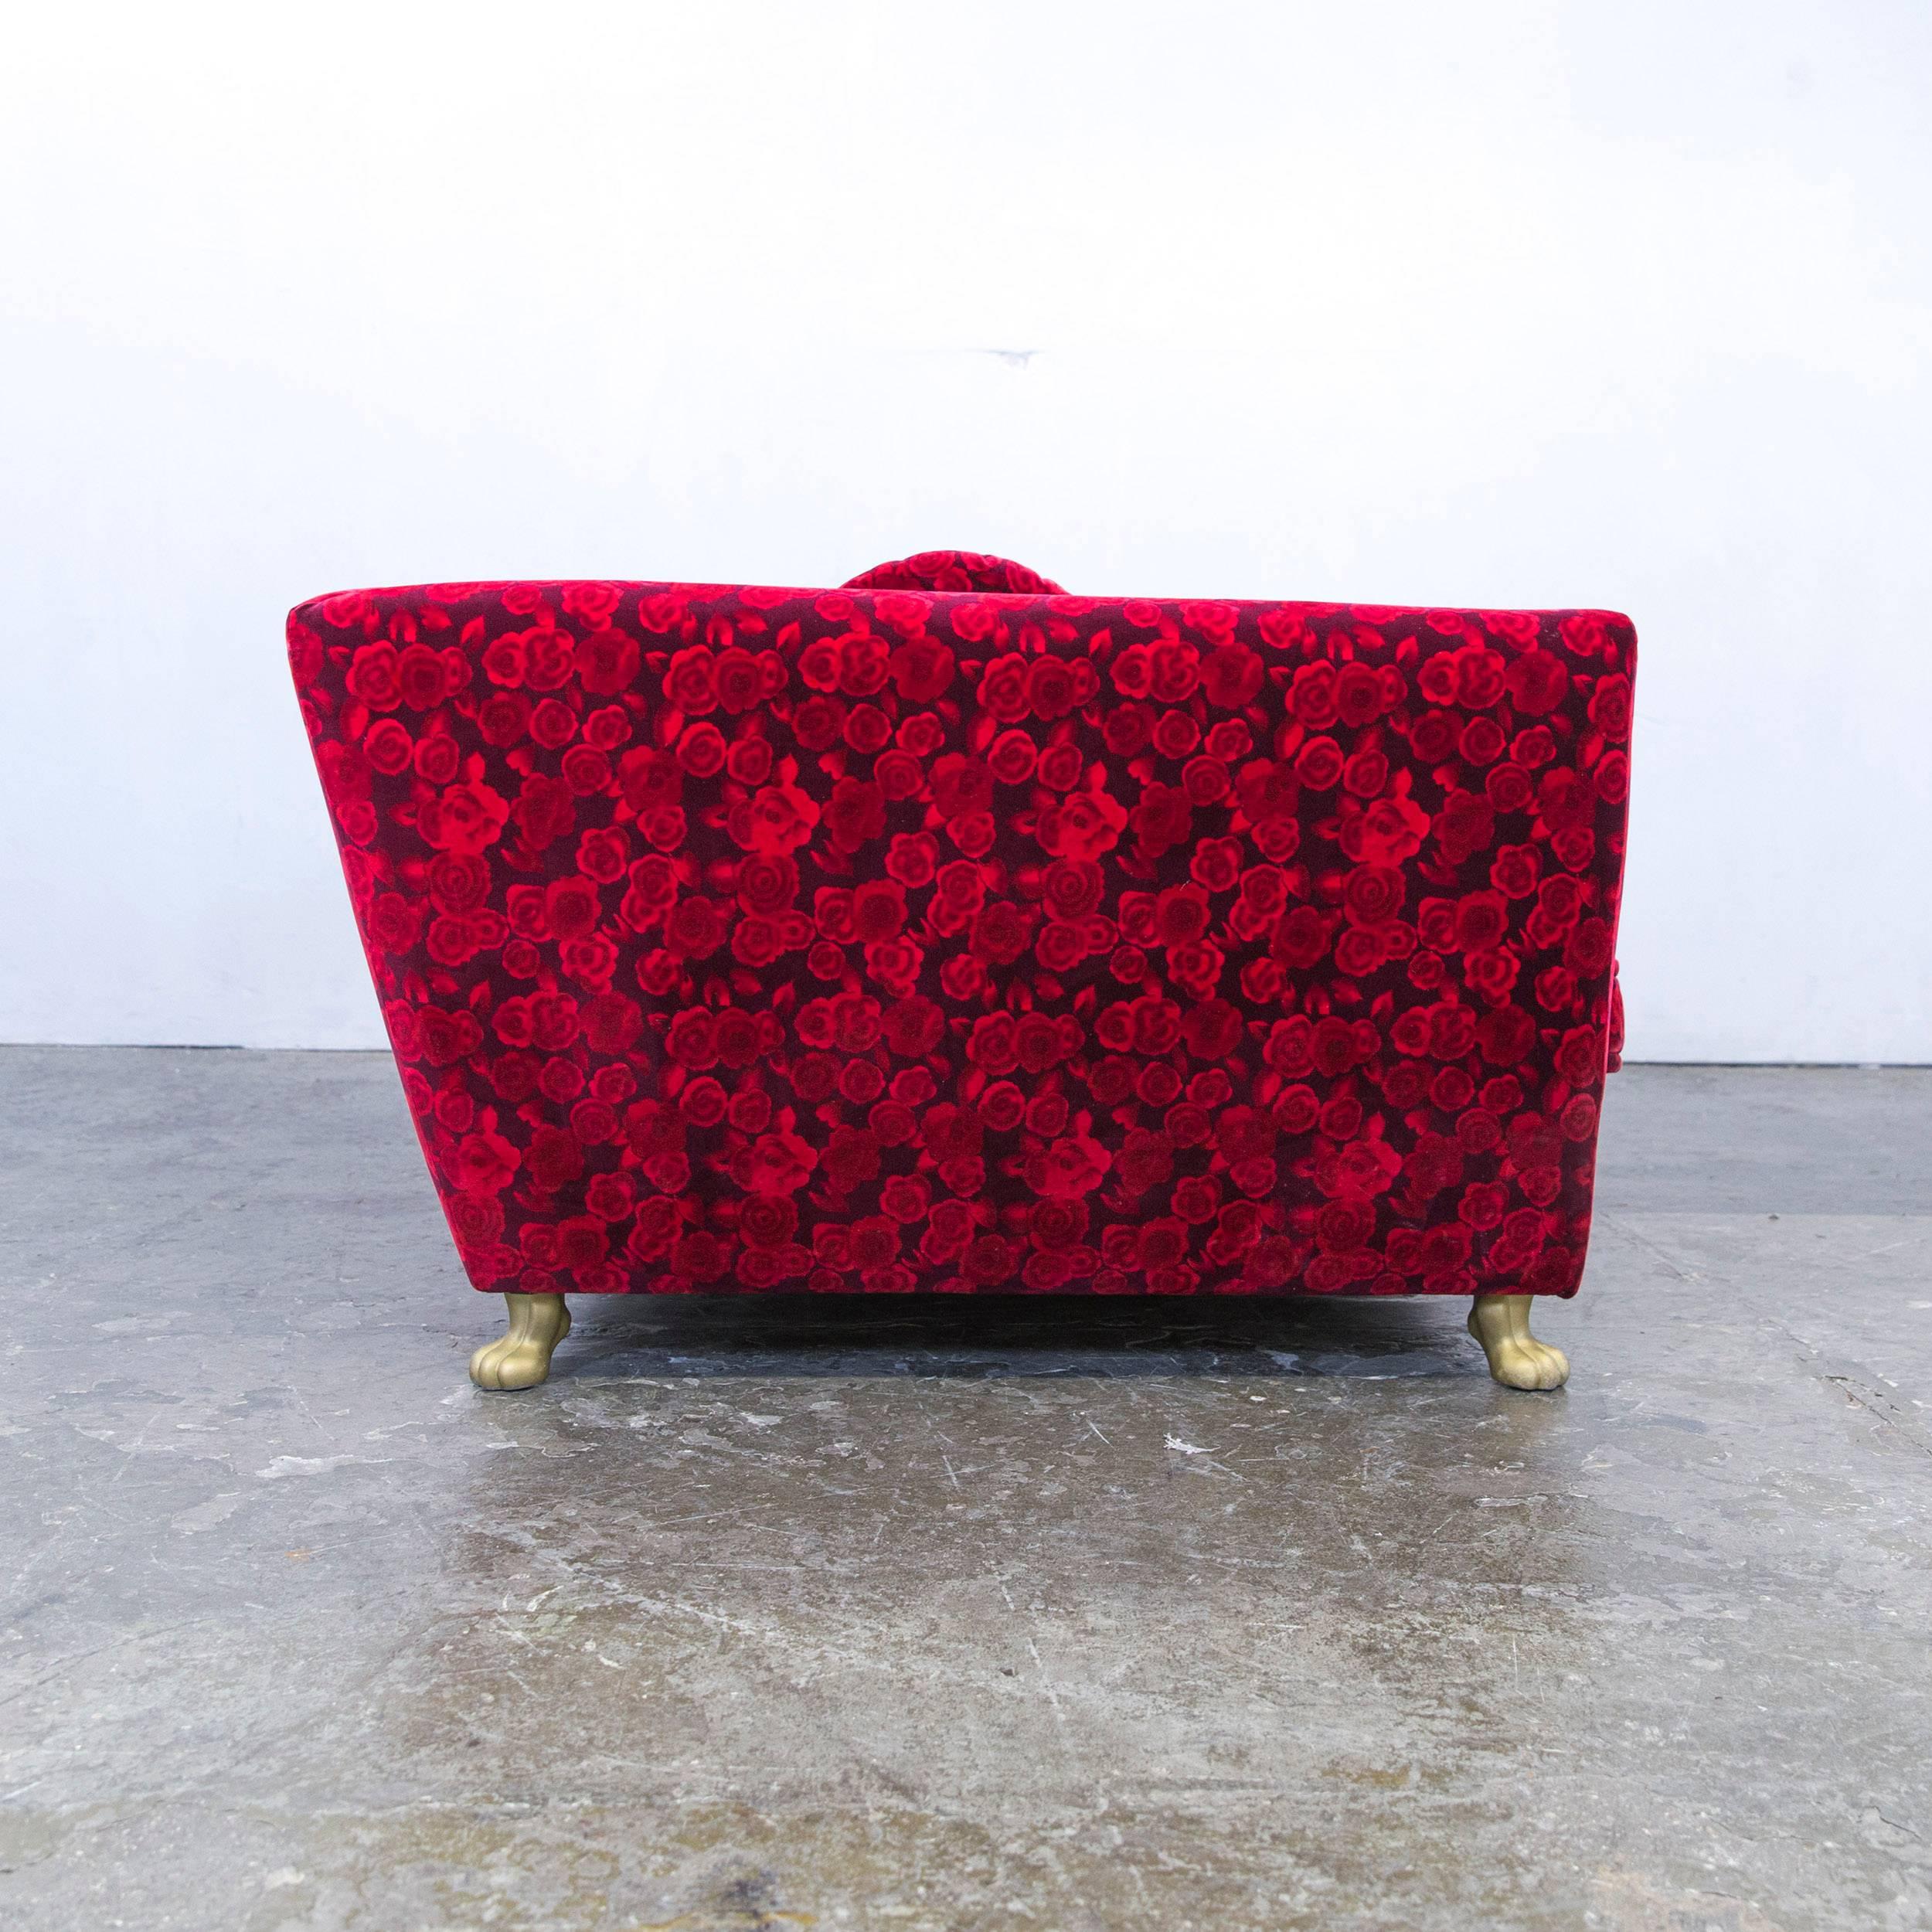 Bretz Monster Designer Sofa Red Fabric Three-Seat Couch Floral Pattern Couch 2